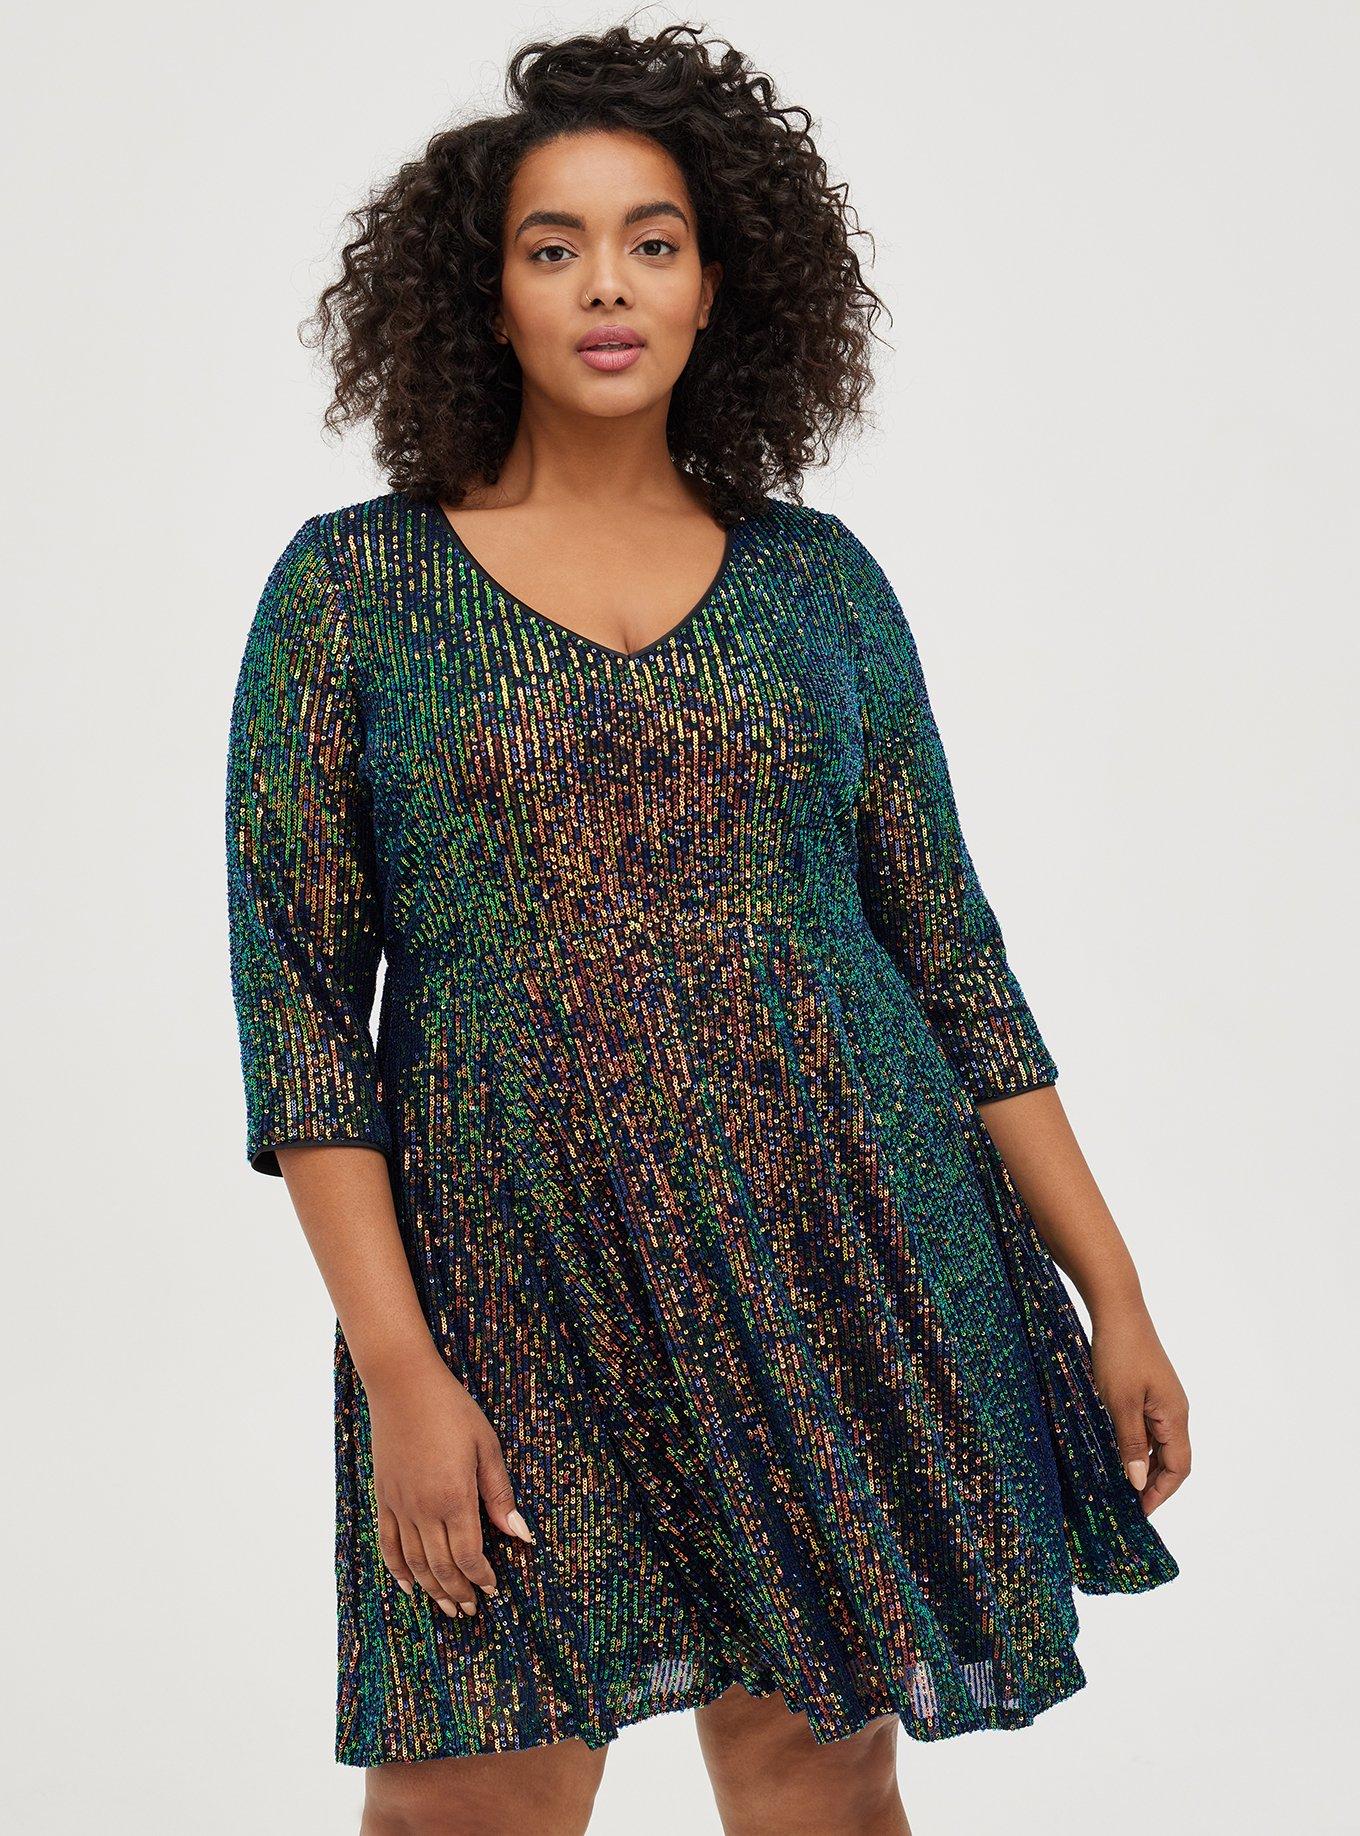 How to Layer Your Party Dresses: a plus size holiday outfit featuring a  colorful sequin dress from Lane Bryant styled with a long sleeved tee and  tights.